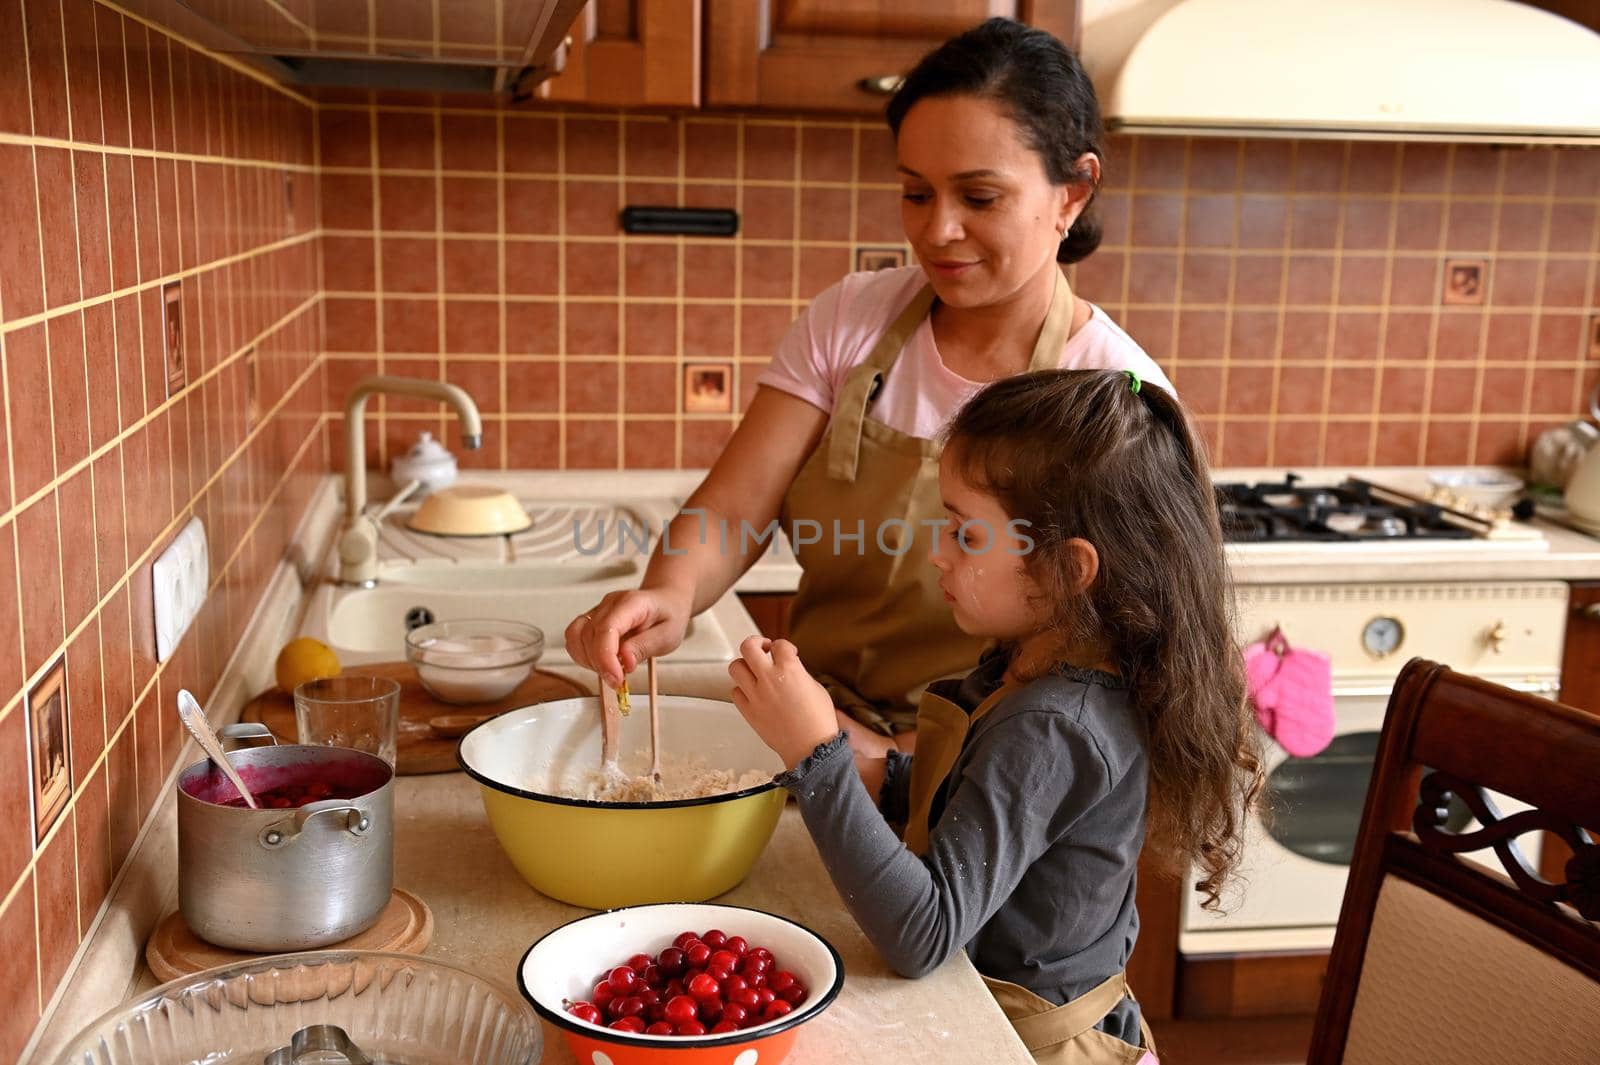 Happy multi-ethnic family, a loving mother and daughter baking together, kneading dough in the home kitchen by artgf